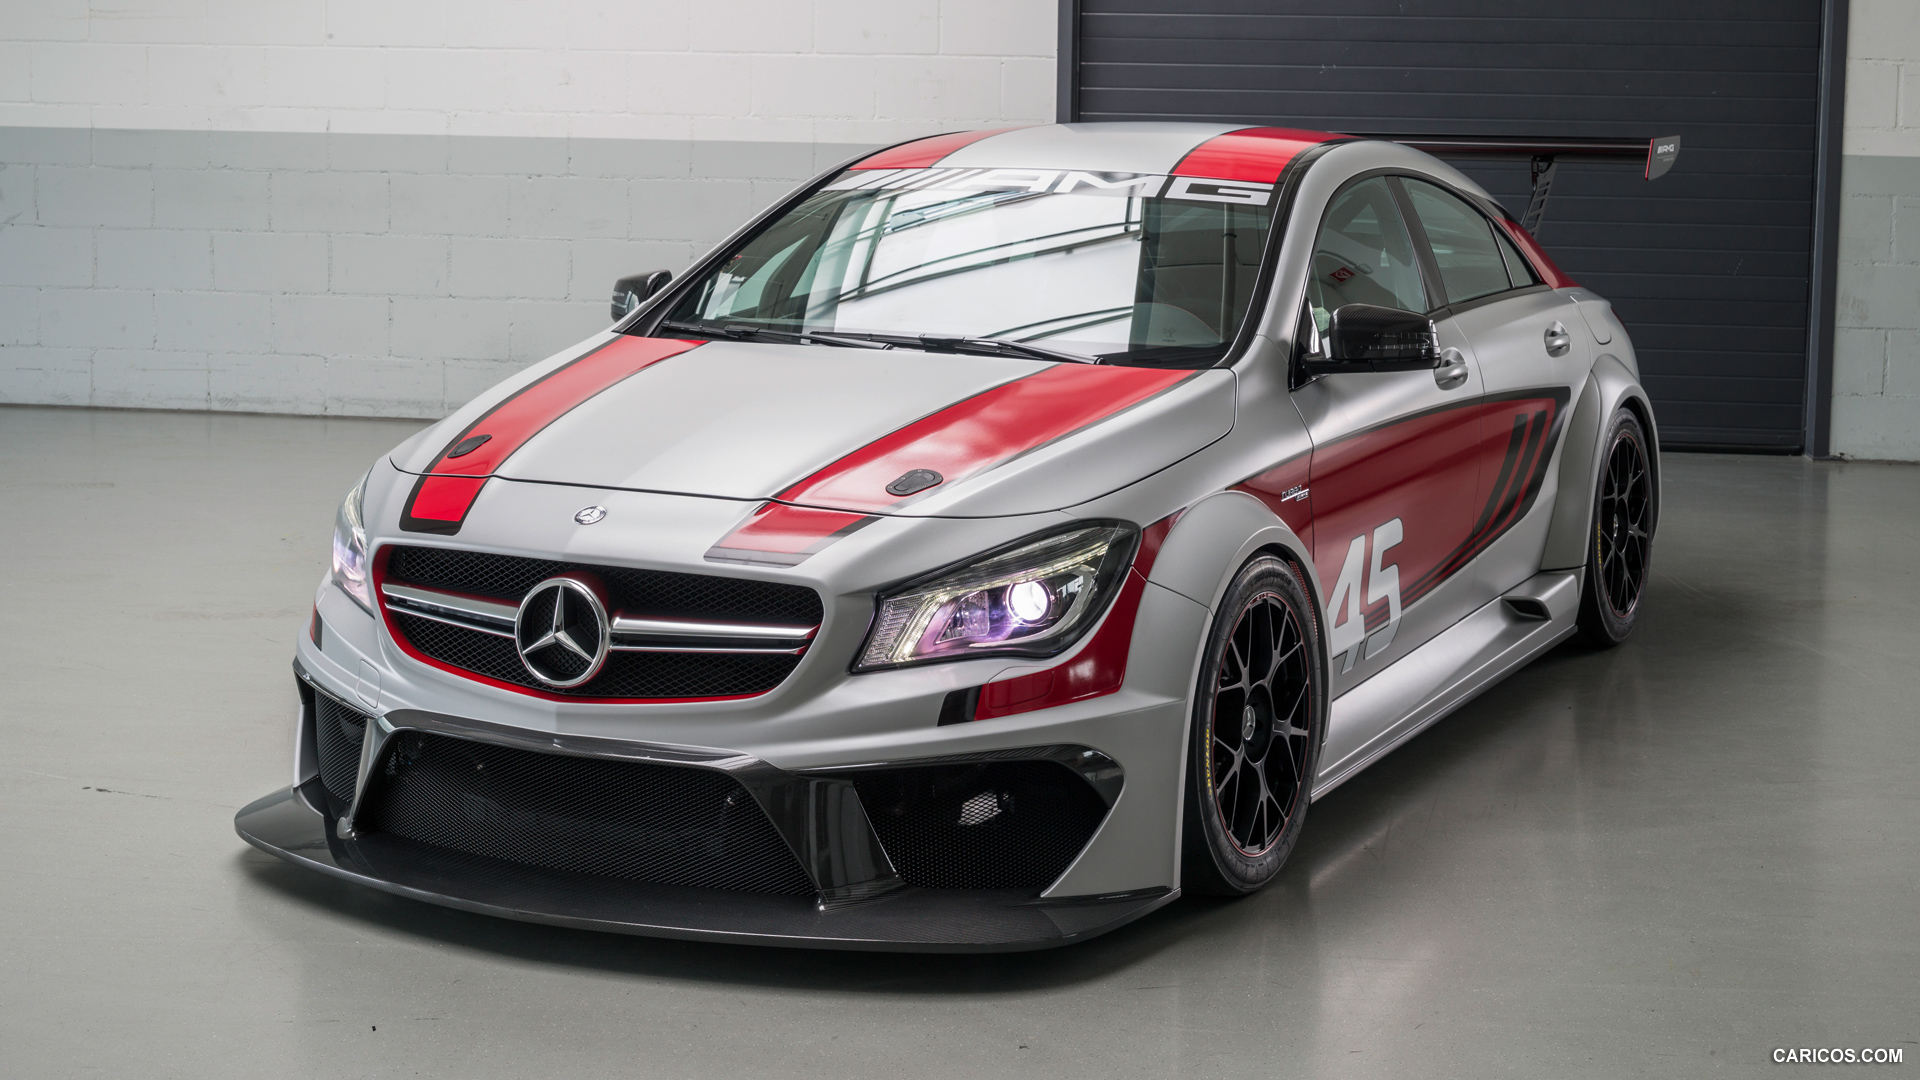 2013 Mercedes-Benz CLA 45 AMG Racing Series Concept  - Front, #15 of 26